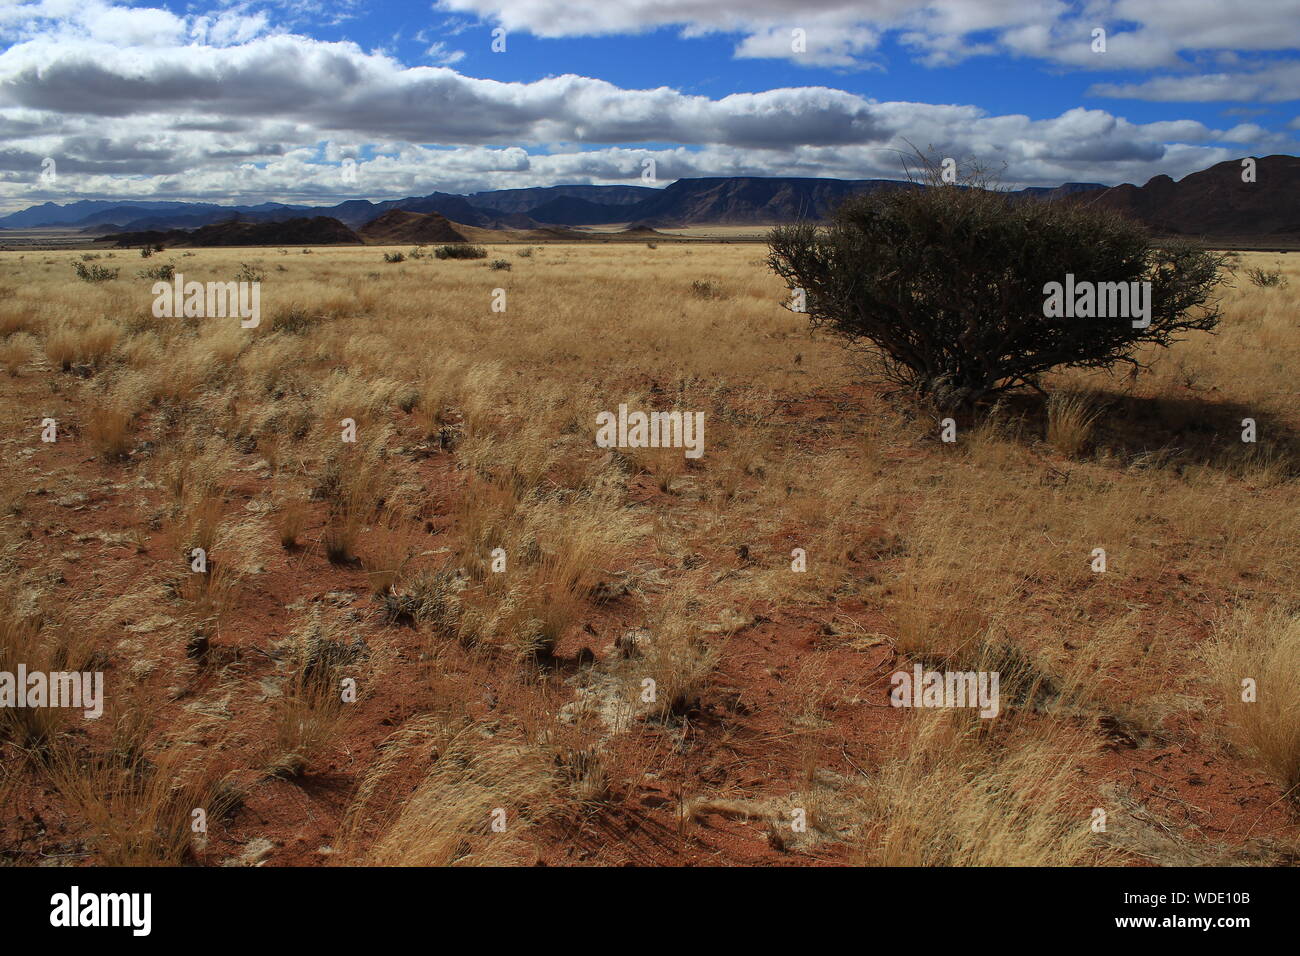 Solitary bush surrounded by dry grass in a desert area near a mountain range in Namibia Stock Photo